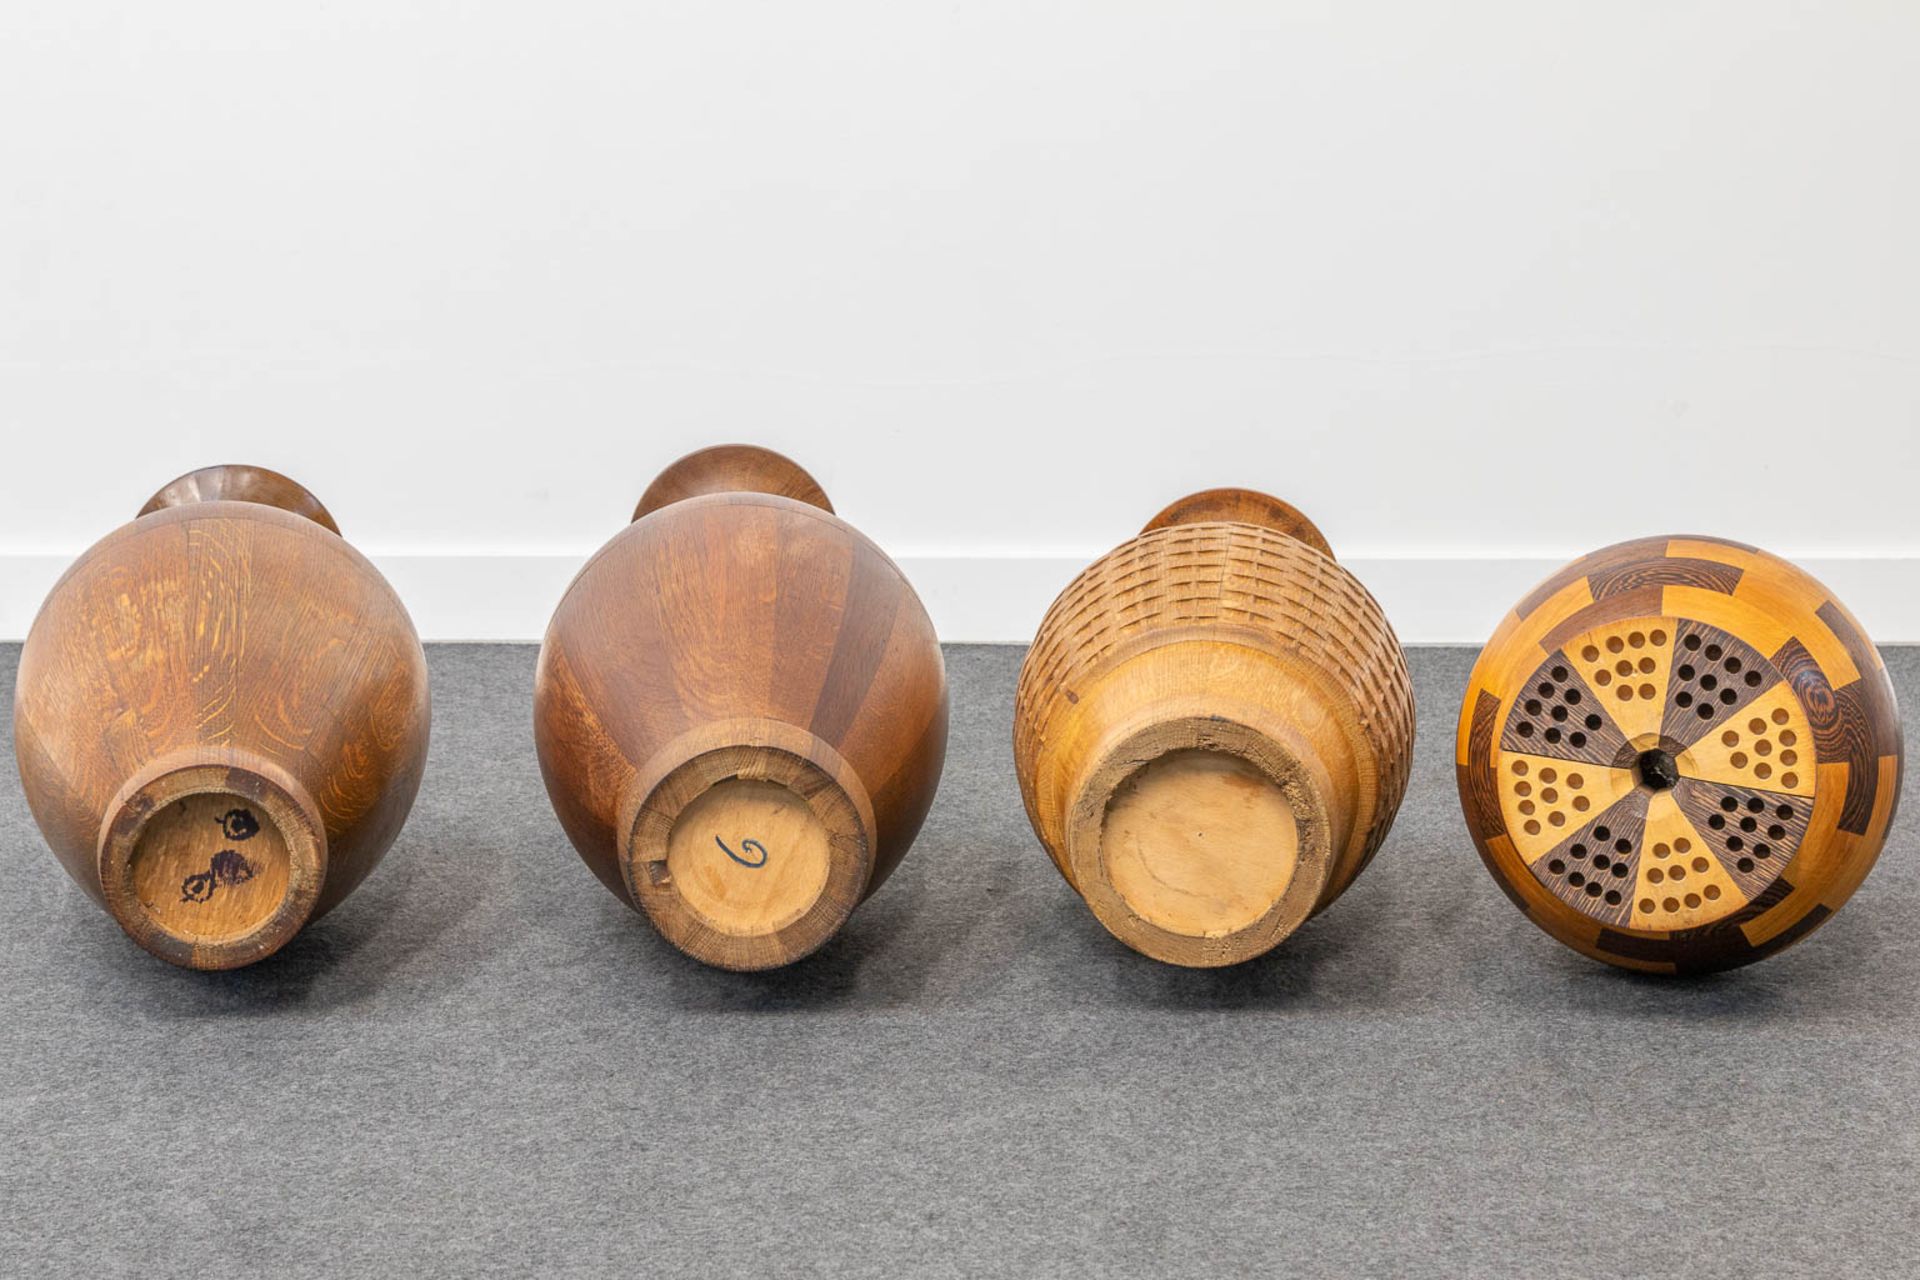 A collection of 4 wood-turned vases with inlay, made by DeCoene in Kortijk, Belgium. - Image 11 of 11